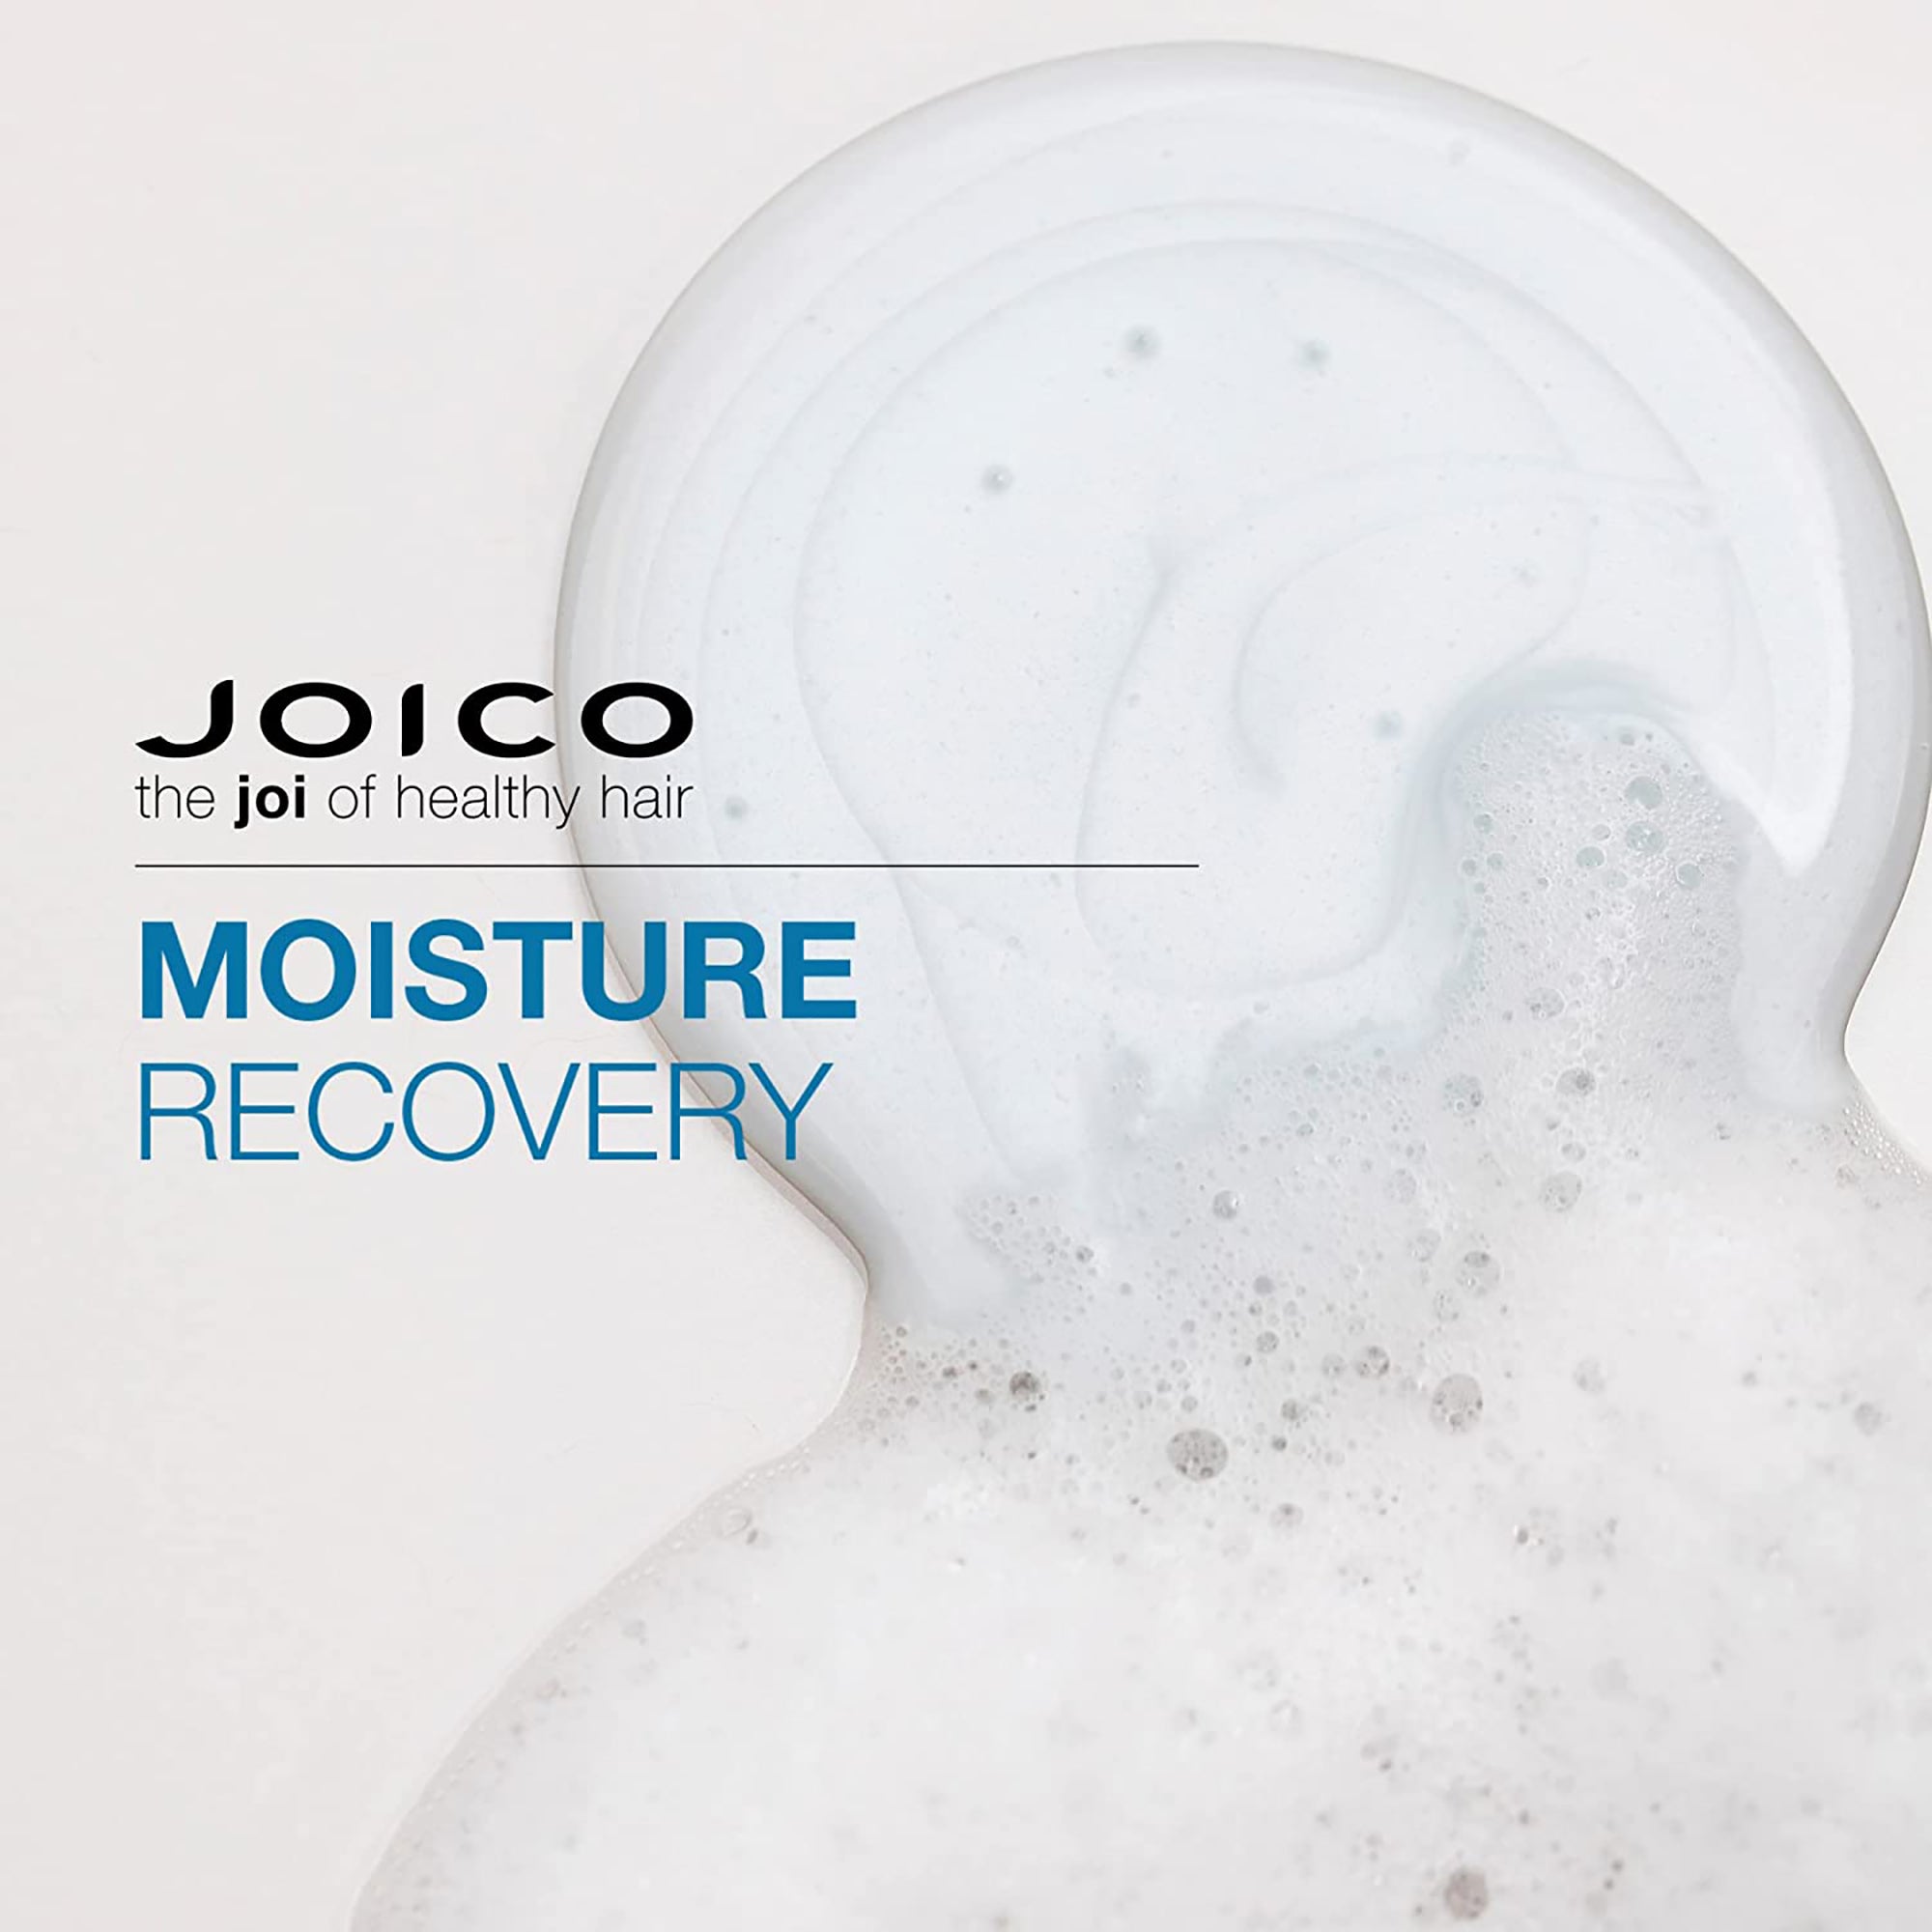 Joico Moisture Recovery Shampoo and Conditioner Liter DUO ($88 VALUE) / 33OZ